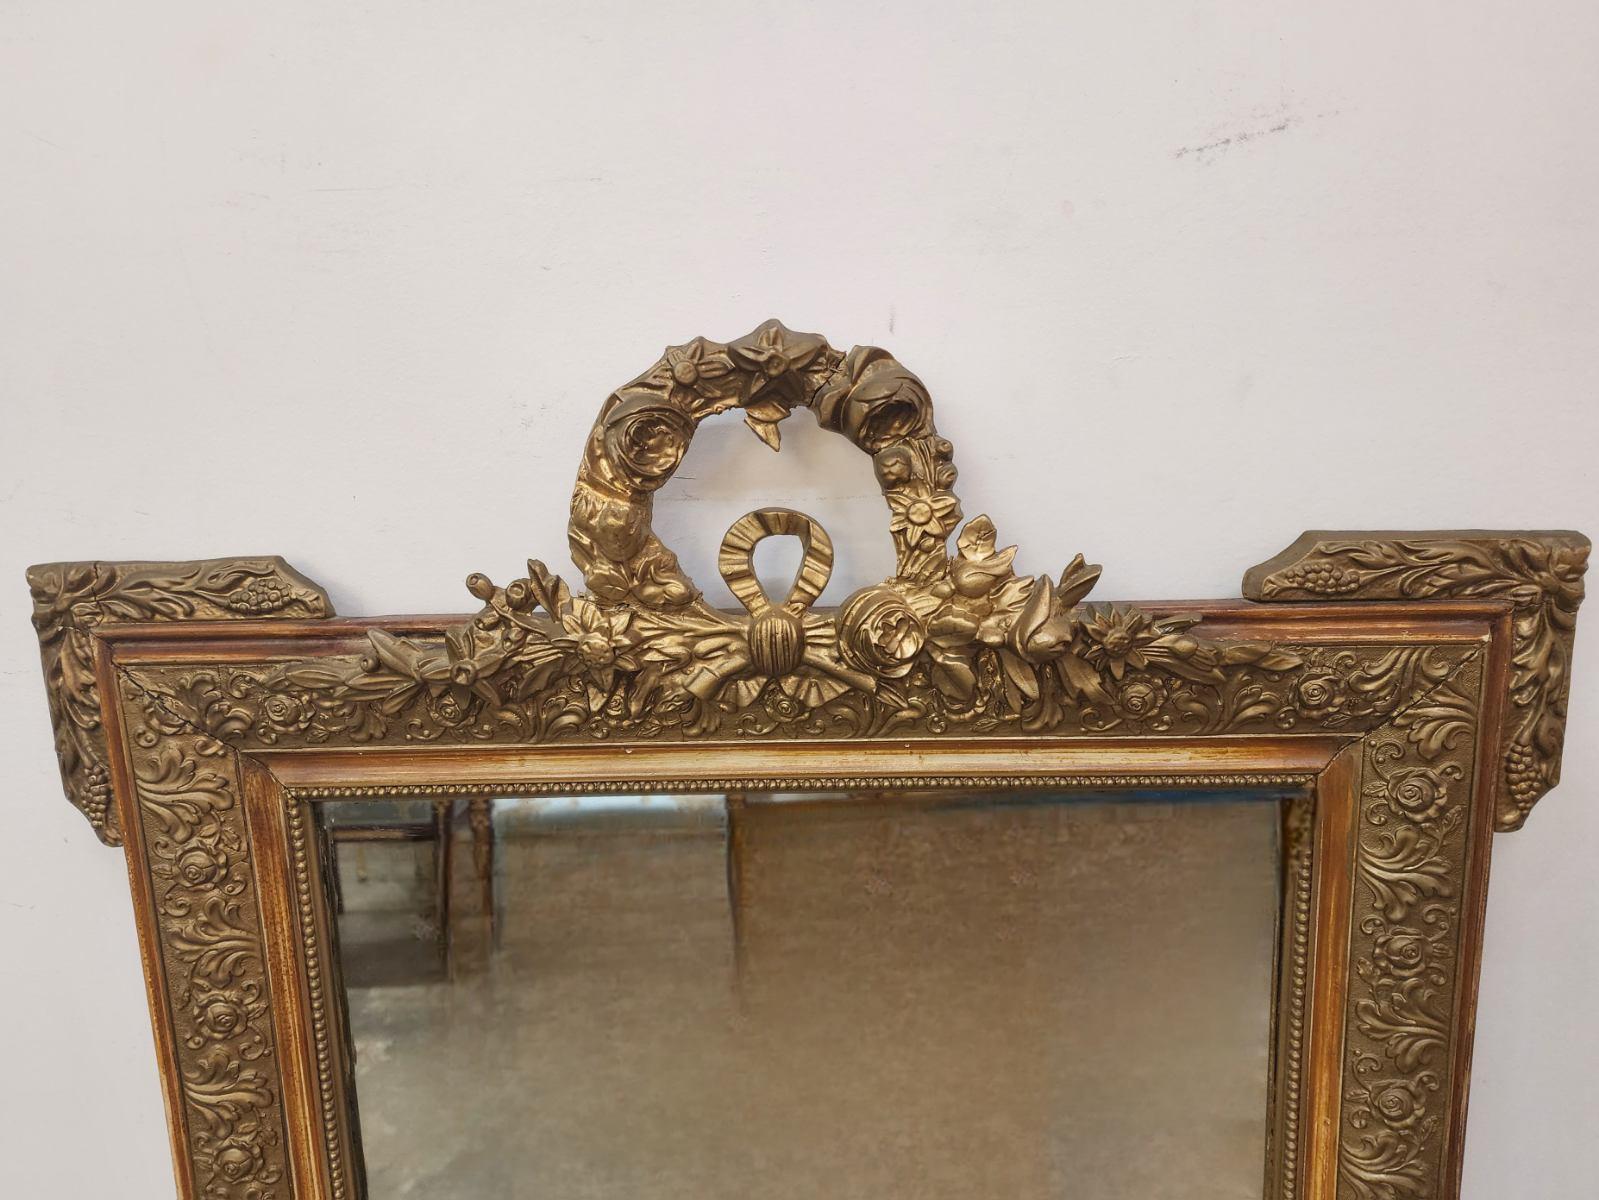 This French Louis XV style gold gilt and painted framed mirror showcases intricate details and ornate design elements characteristic of the period. The delicate gold gilt accents and painted motifs on the frame capture the opulence and elegance of